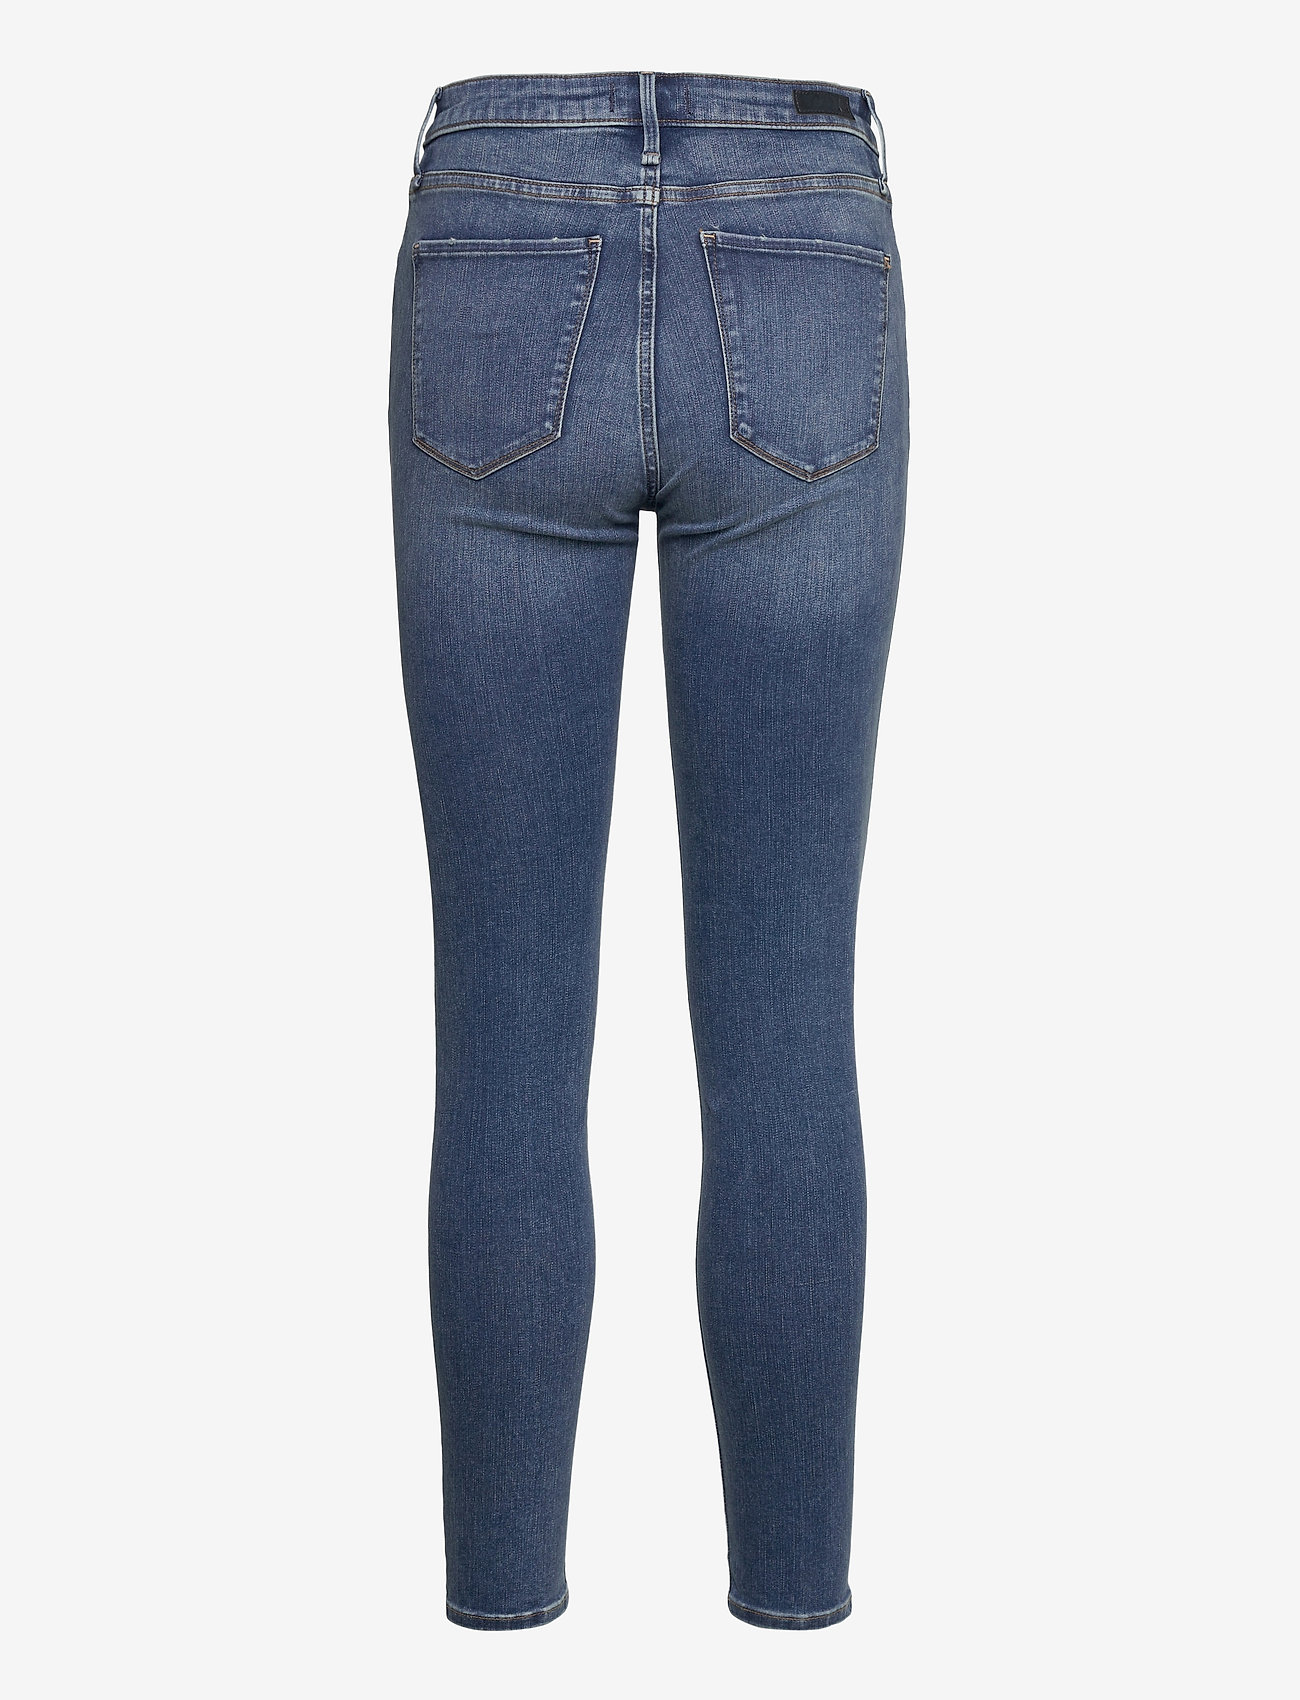 abercrombie and fitch womens jeans